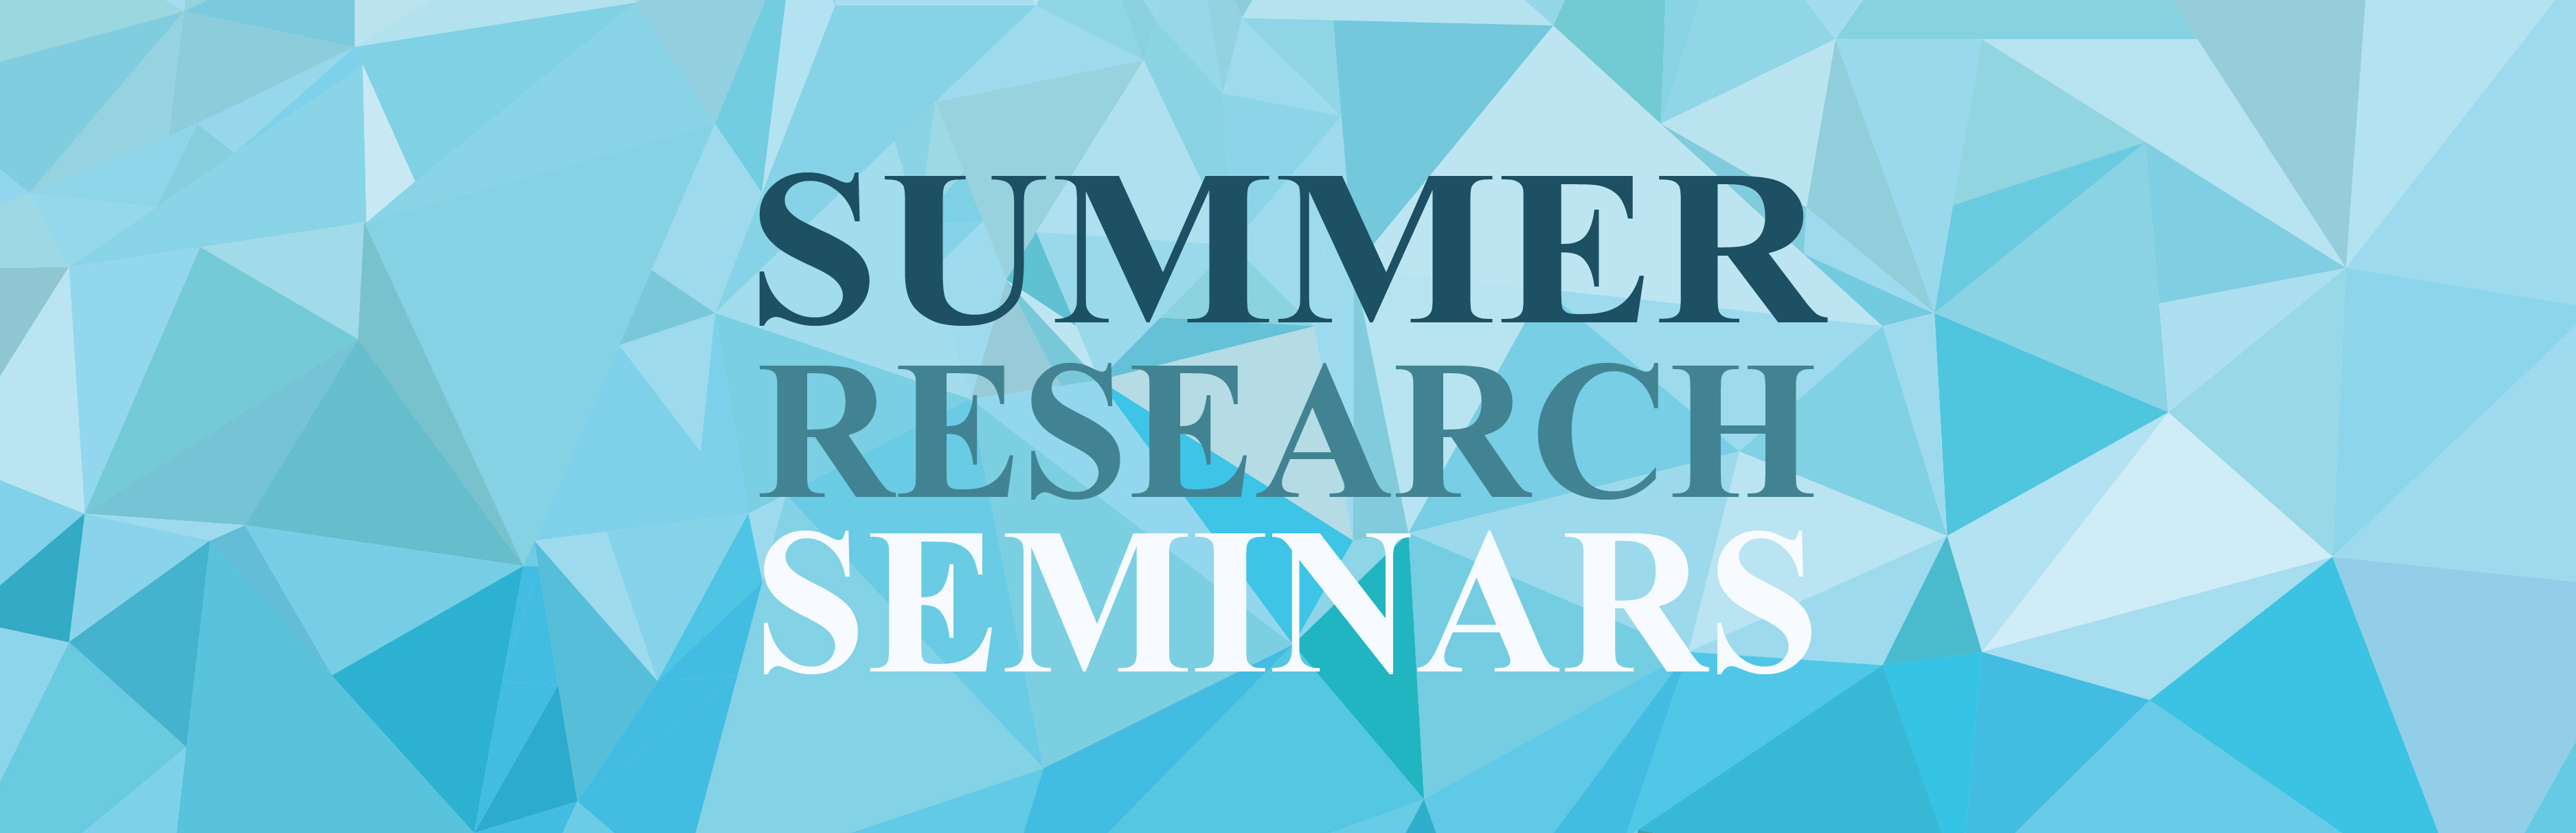 Summer Research Seminars on blue background